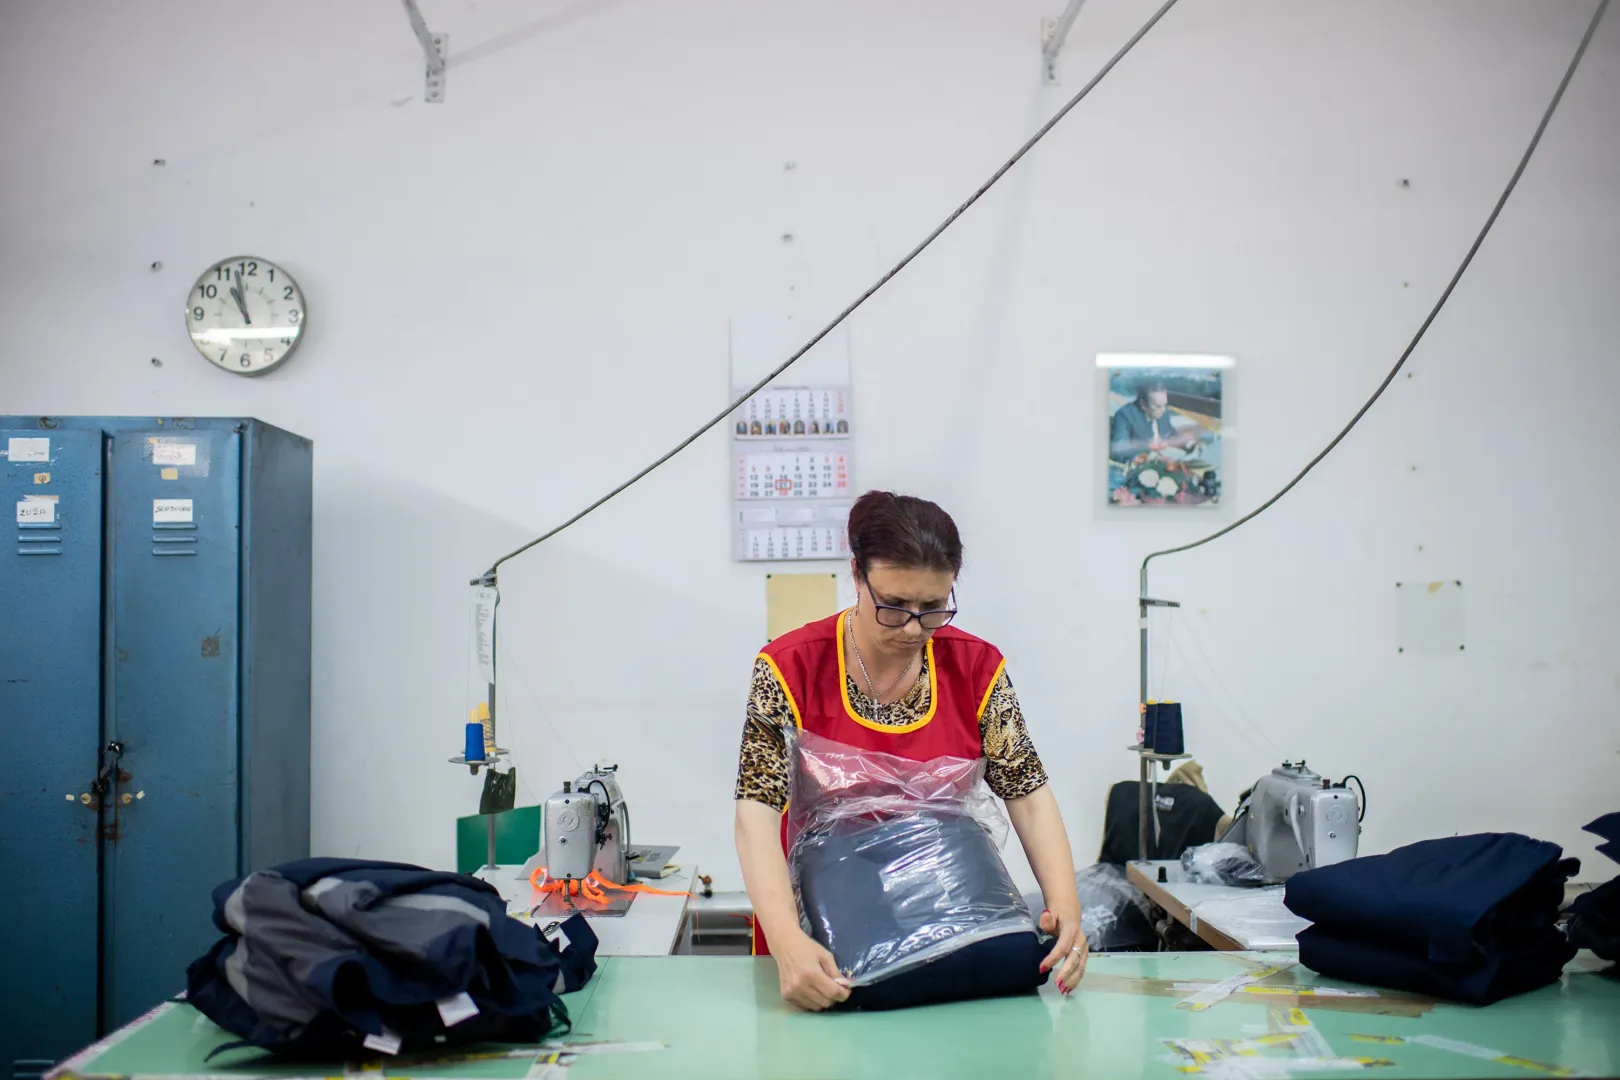 A worker packages clothes at the Željezničar company's sewing facility in Subotica. In the background on the wall hangs a portrait of Josip Broz Tito, former President of Yugoslavia – Photo by János Bődey / Telex